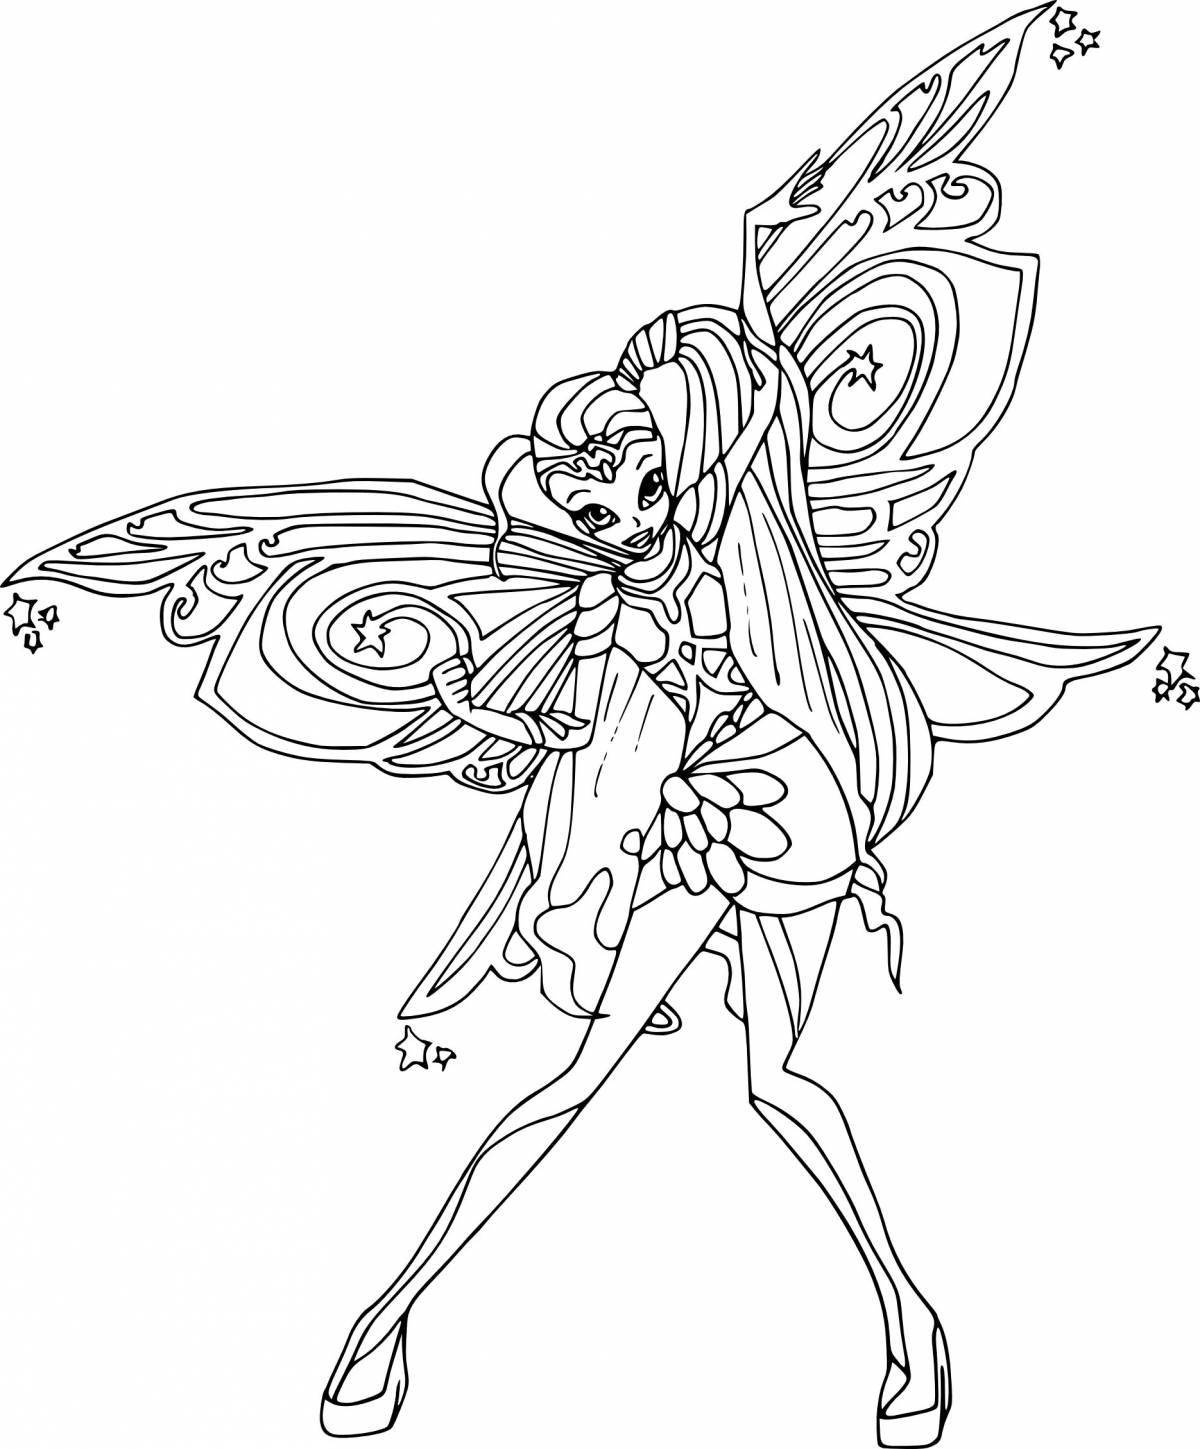 Tynix winx fairy coloring page